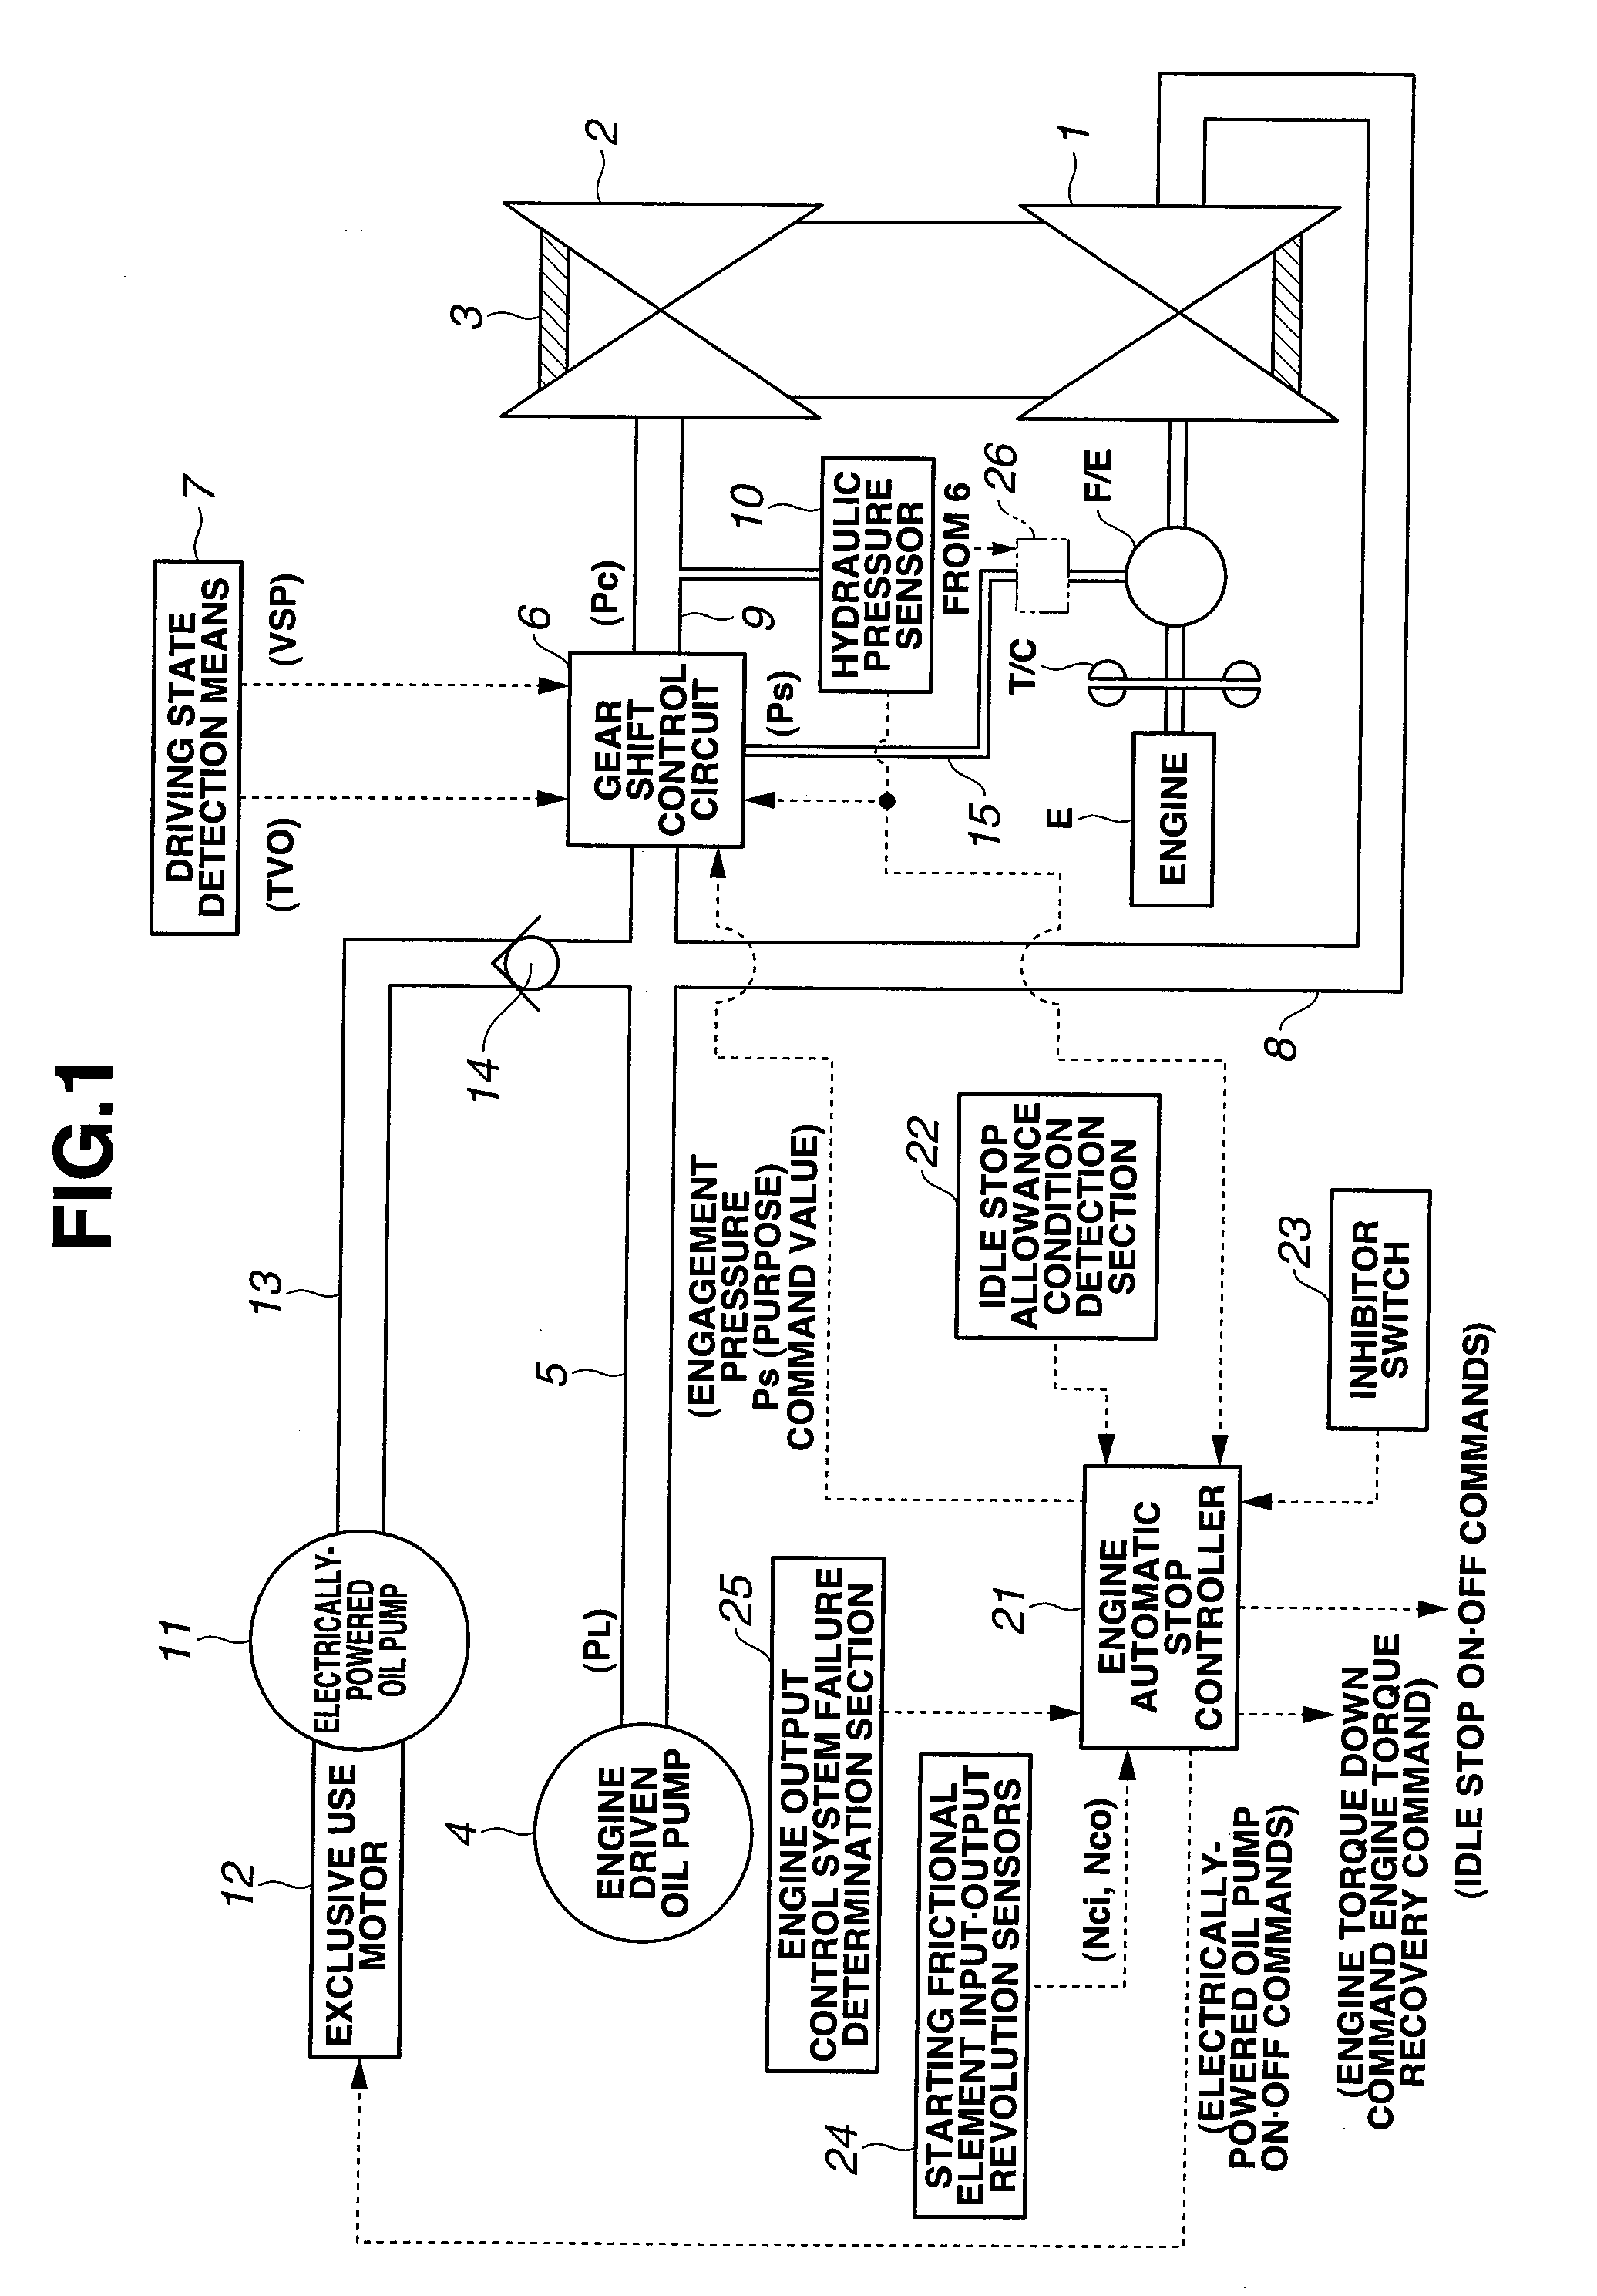 Fastening pressure control device for starting friction element at time of controlling idle stop of vehicle